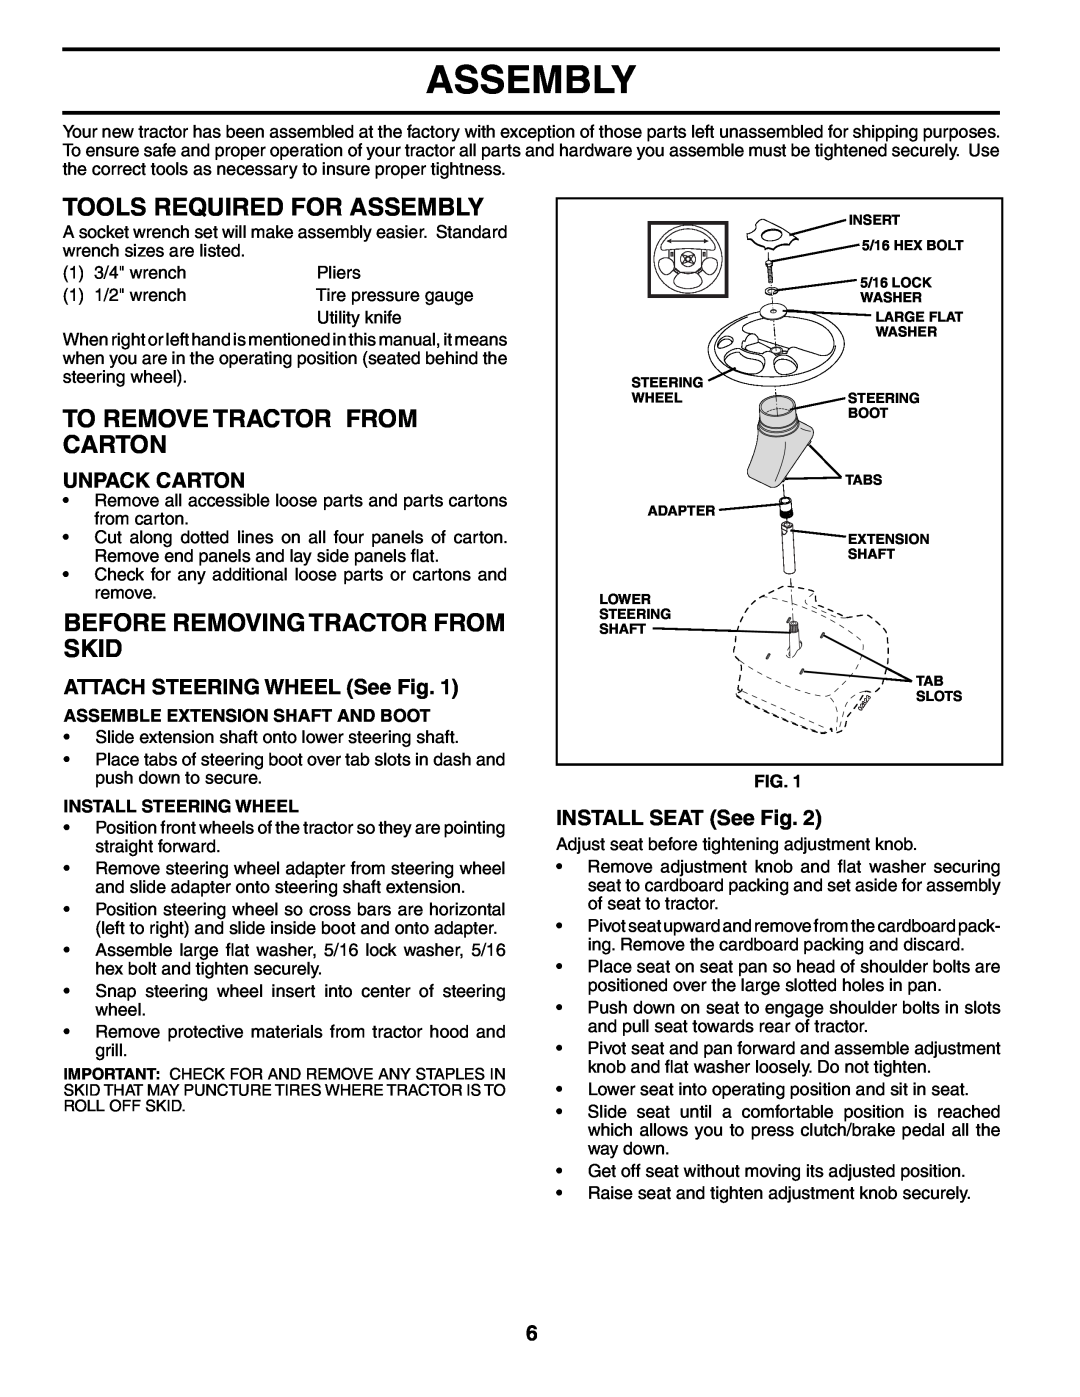 Ryobi 197788 manual Tools Required For Assembly, To Remove Tractor From Carton, Before Removing Tractor From Skid 